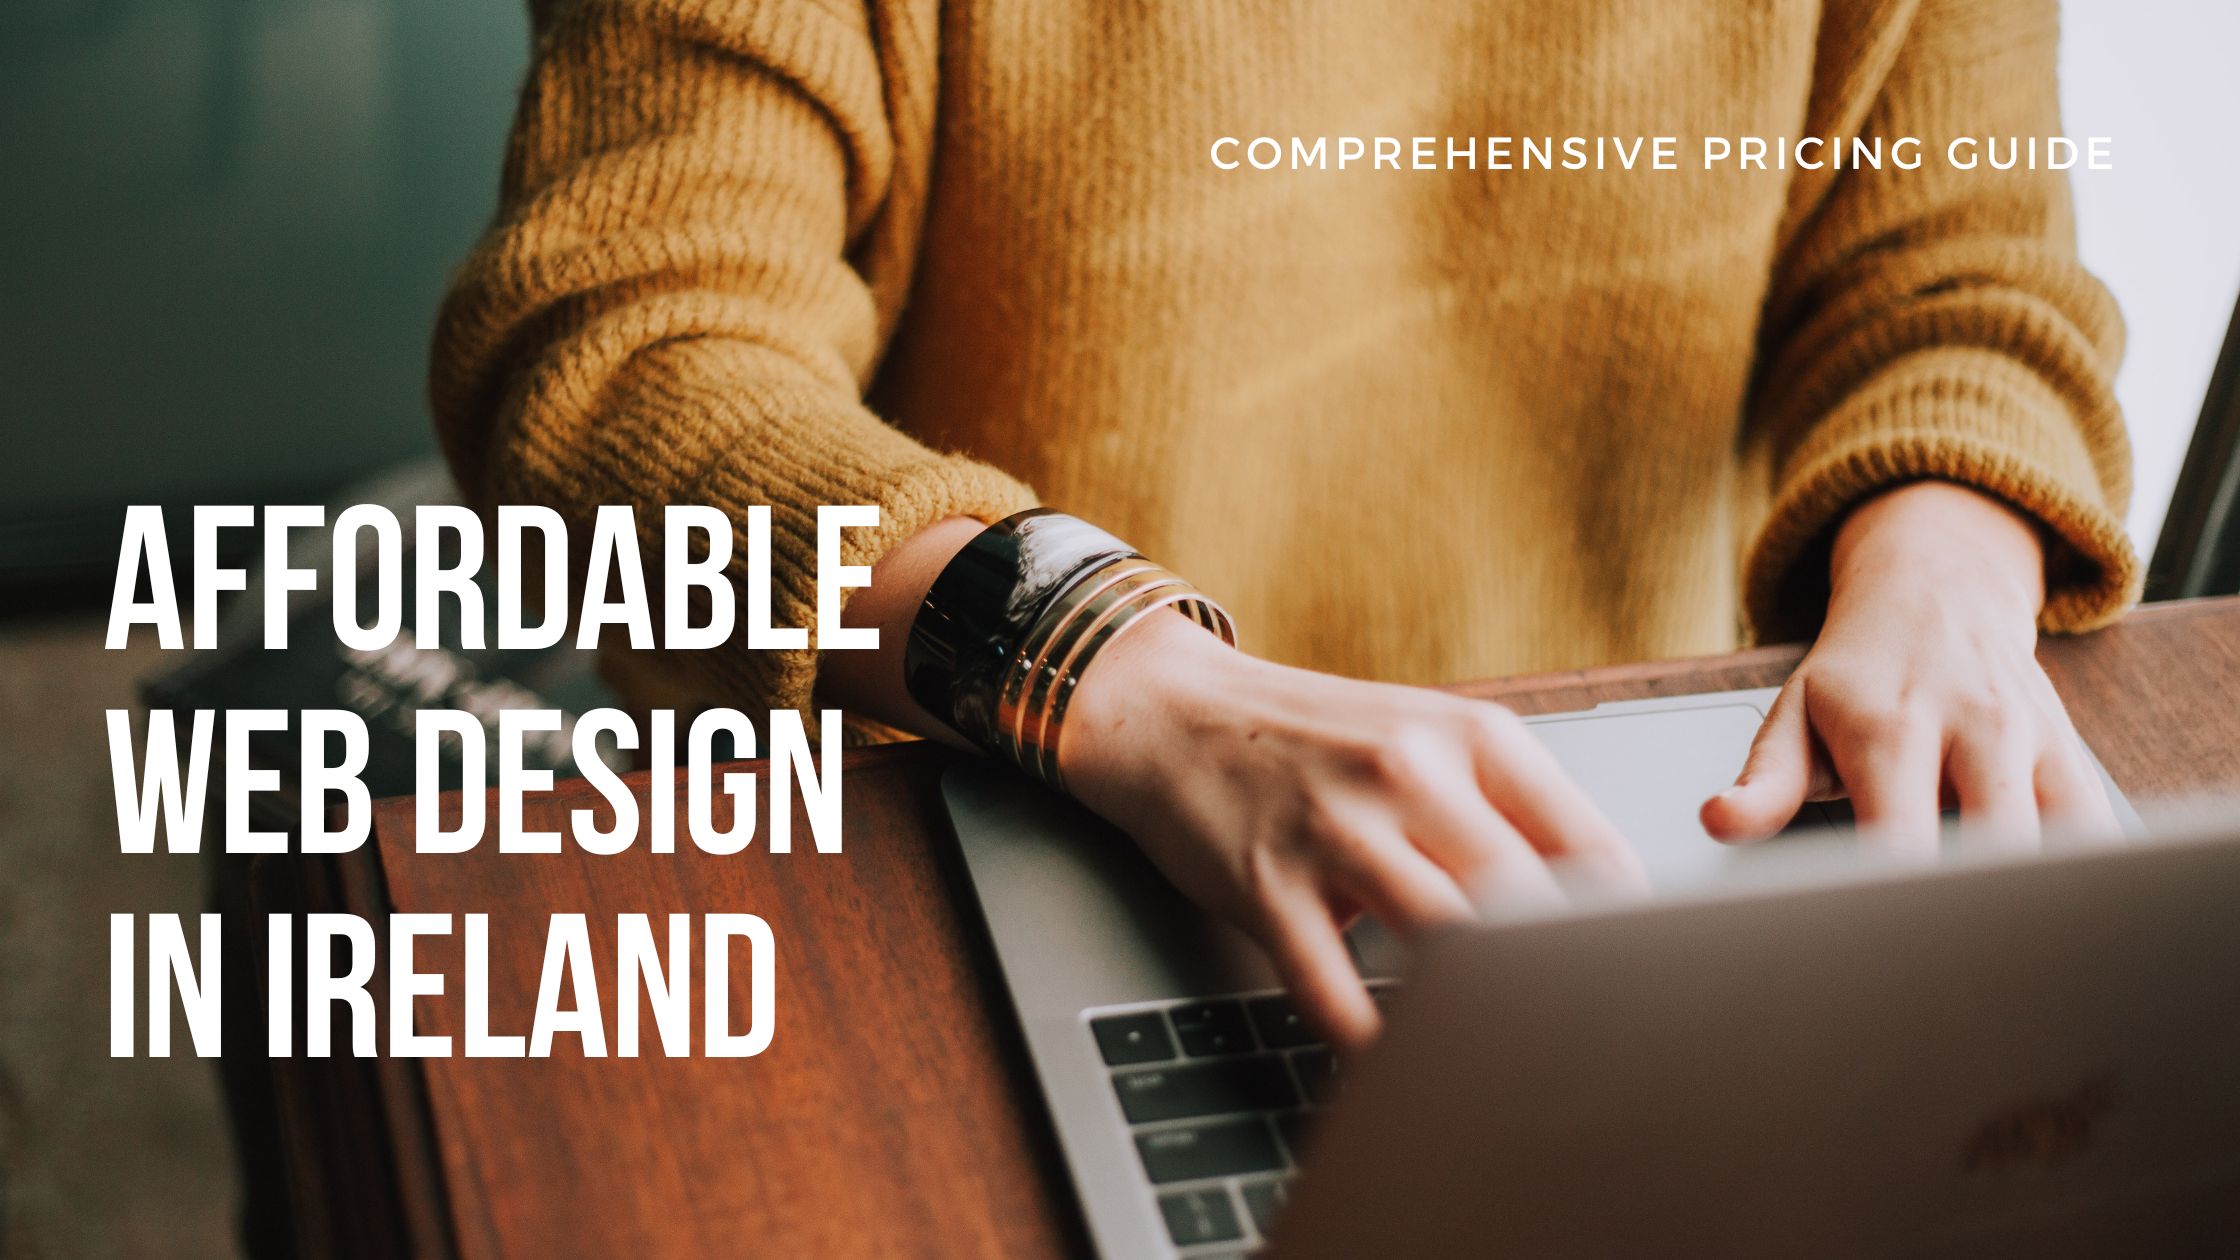 Affordable Web Design in Ireland - Comprehensive Pricing Guide